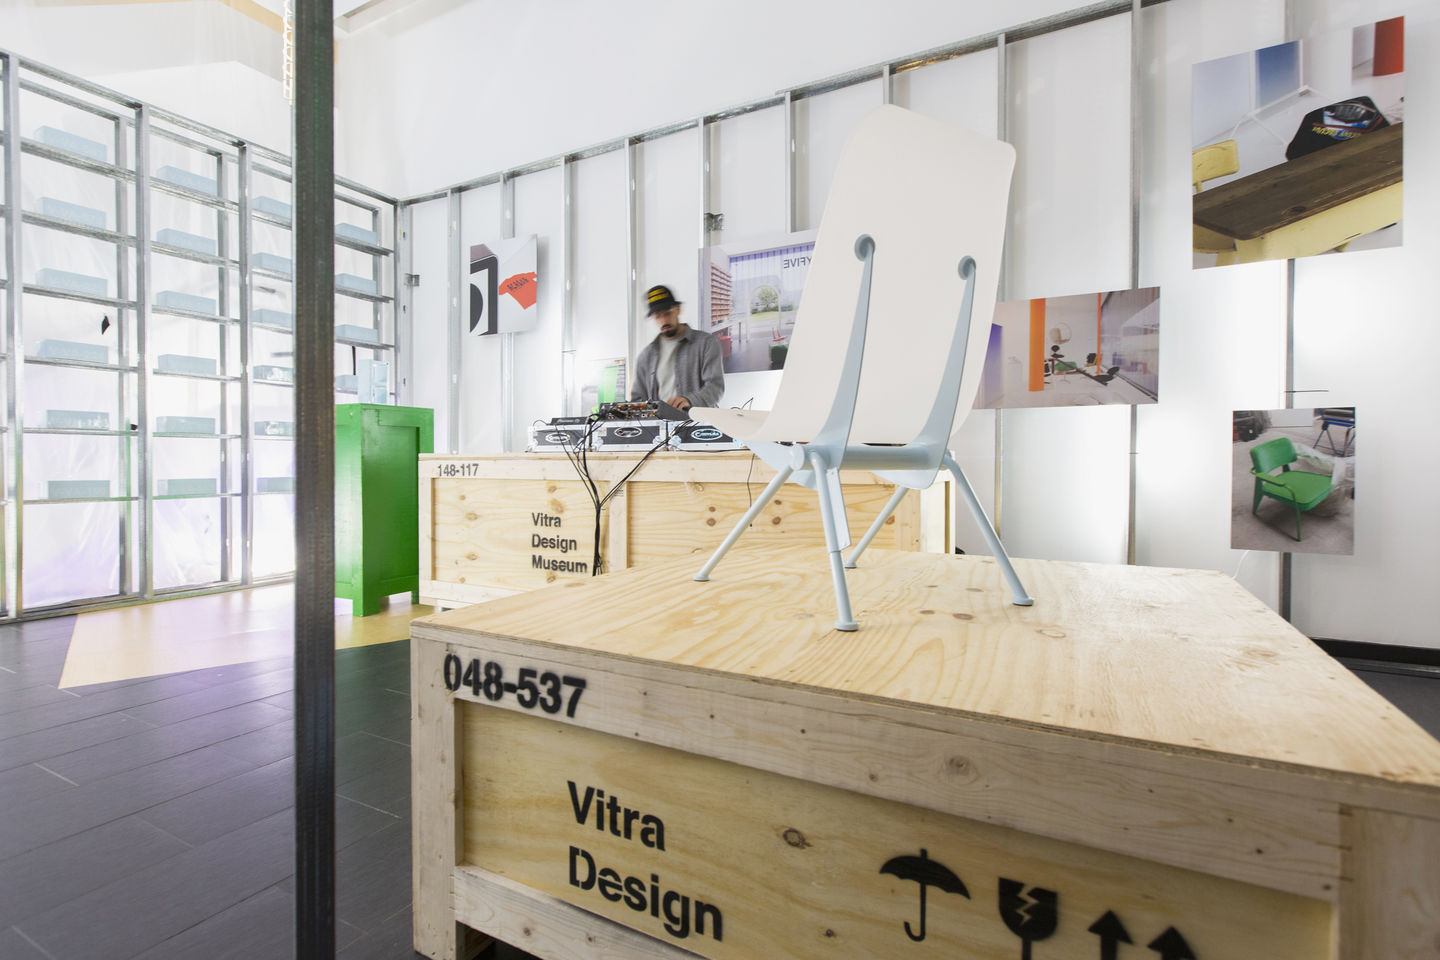 Virgil Abloh and Vitra Want to Democratize Design